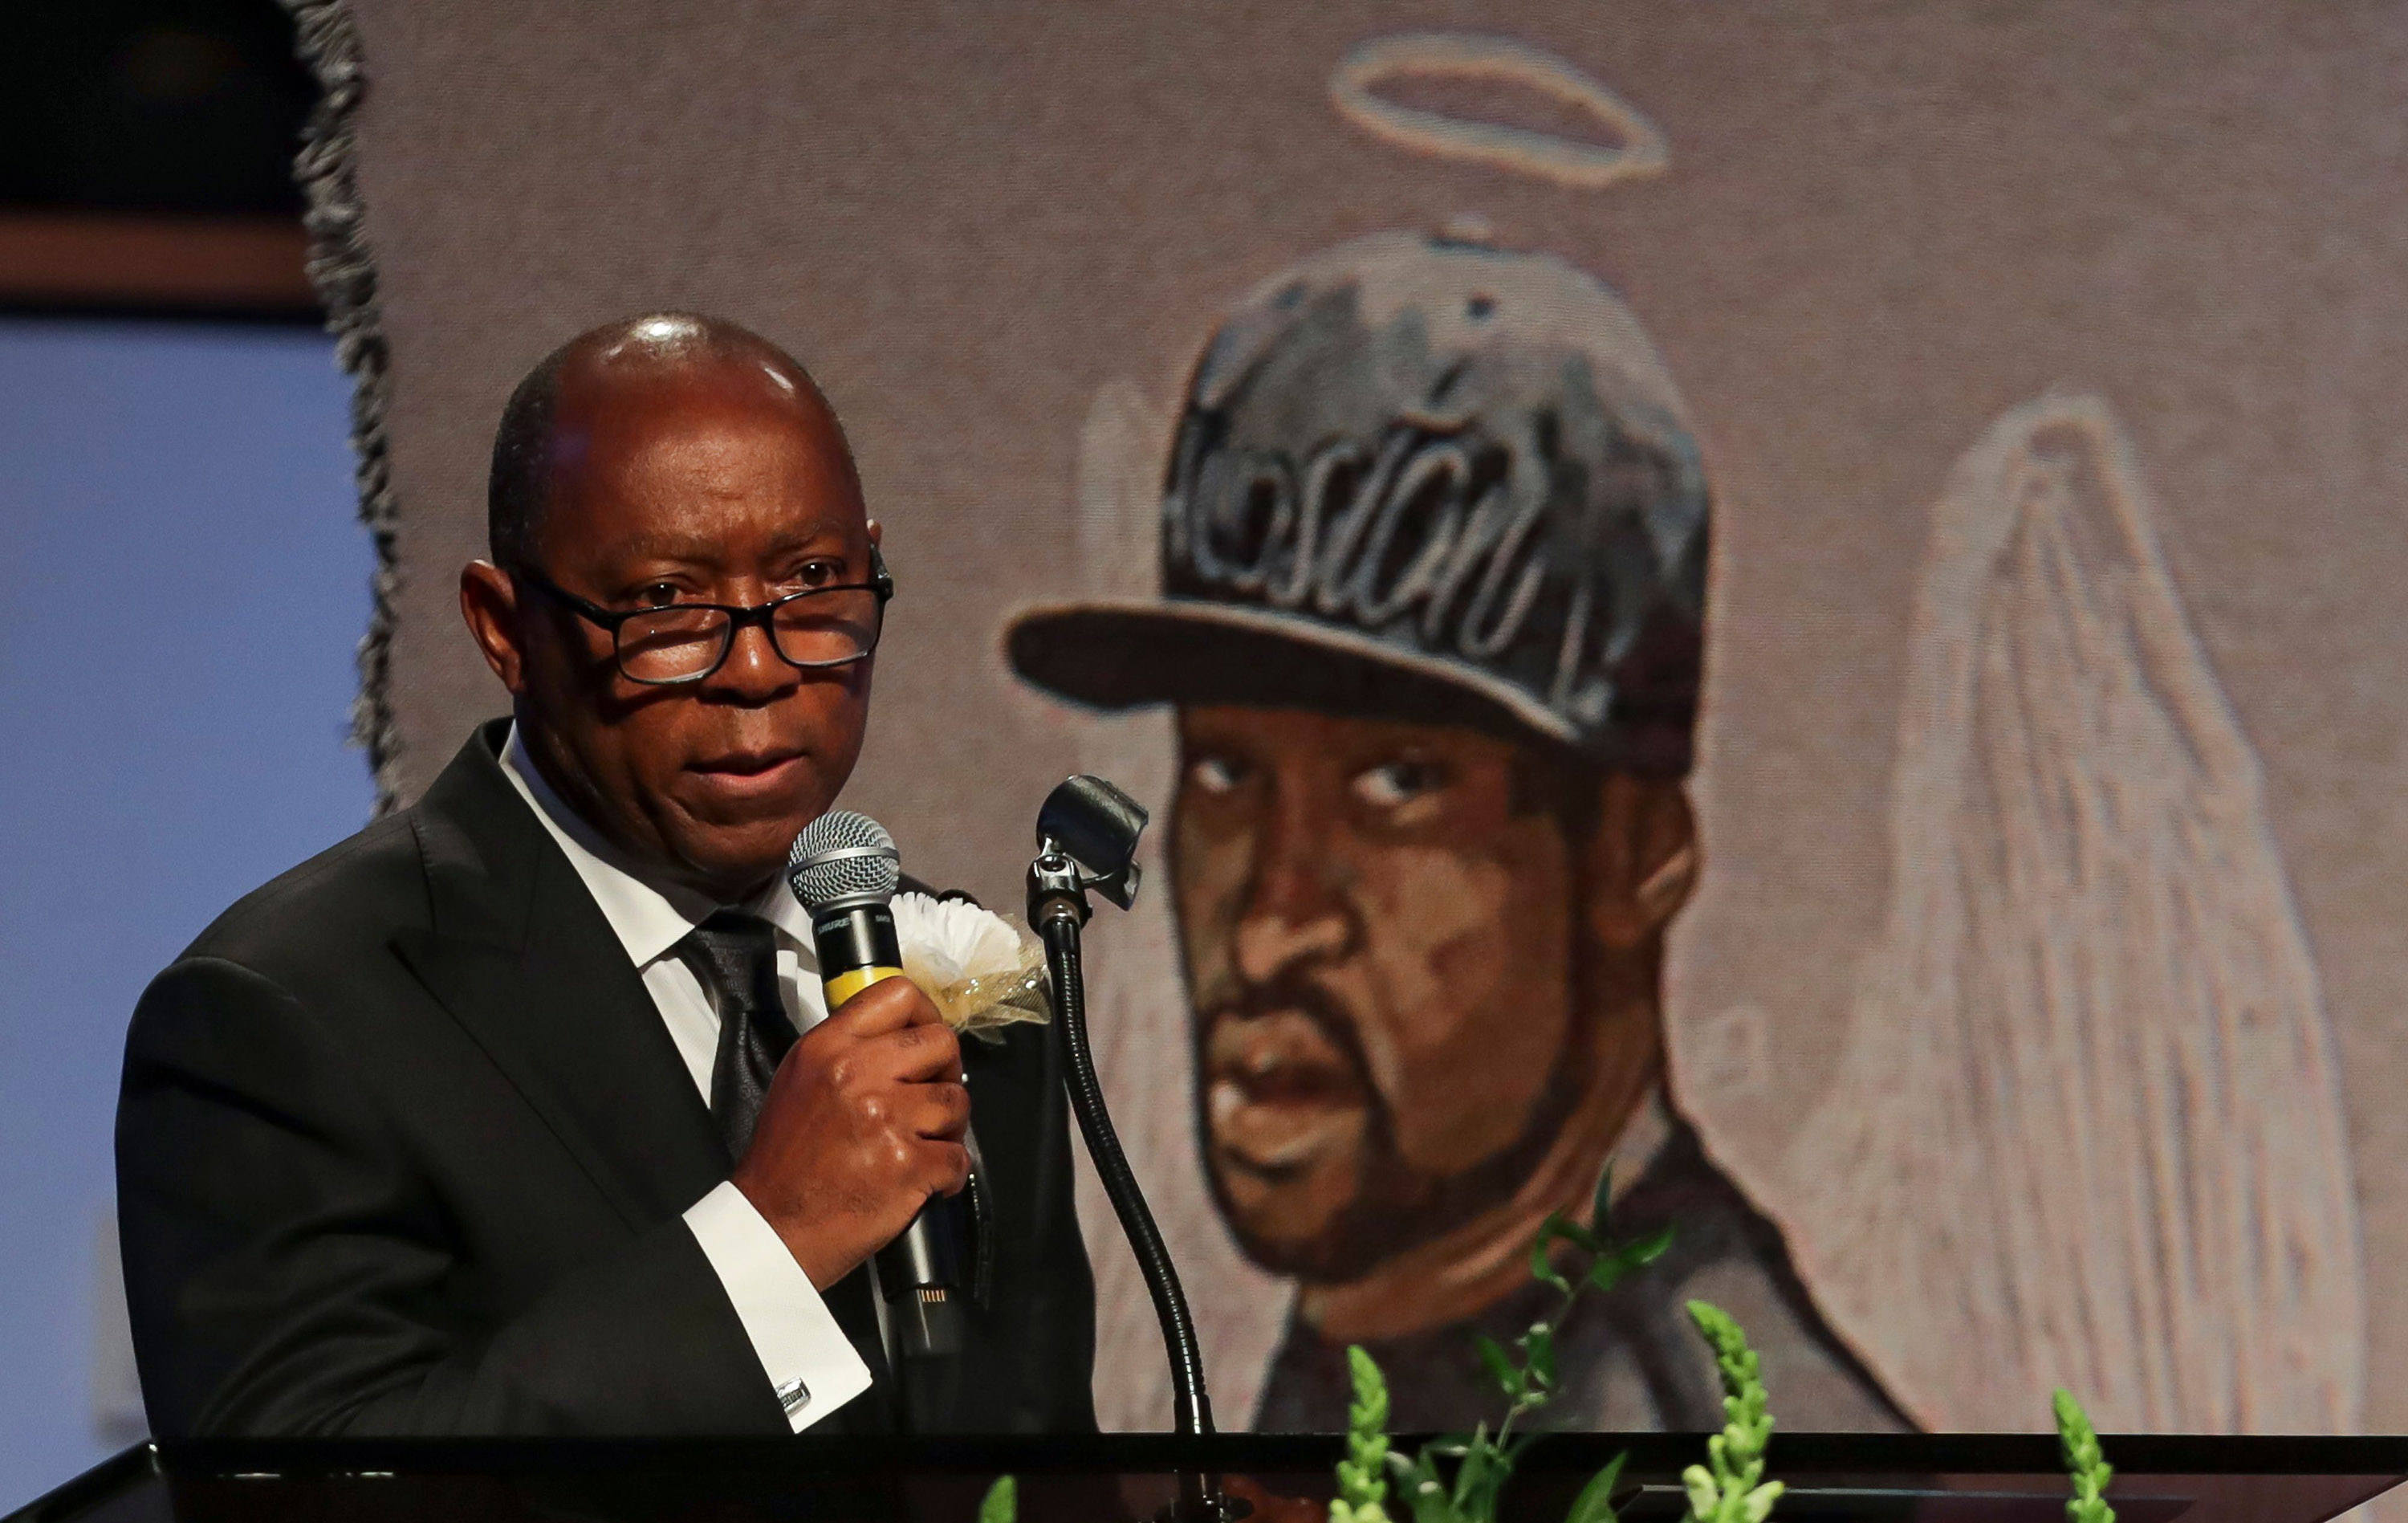 Houston Mayor Sylvester Turner speaks during the funeral for George Floyd on June 9, at The Fountain of Praise church in Houston.